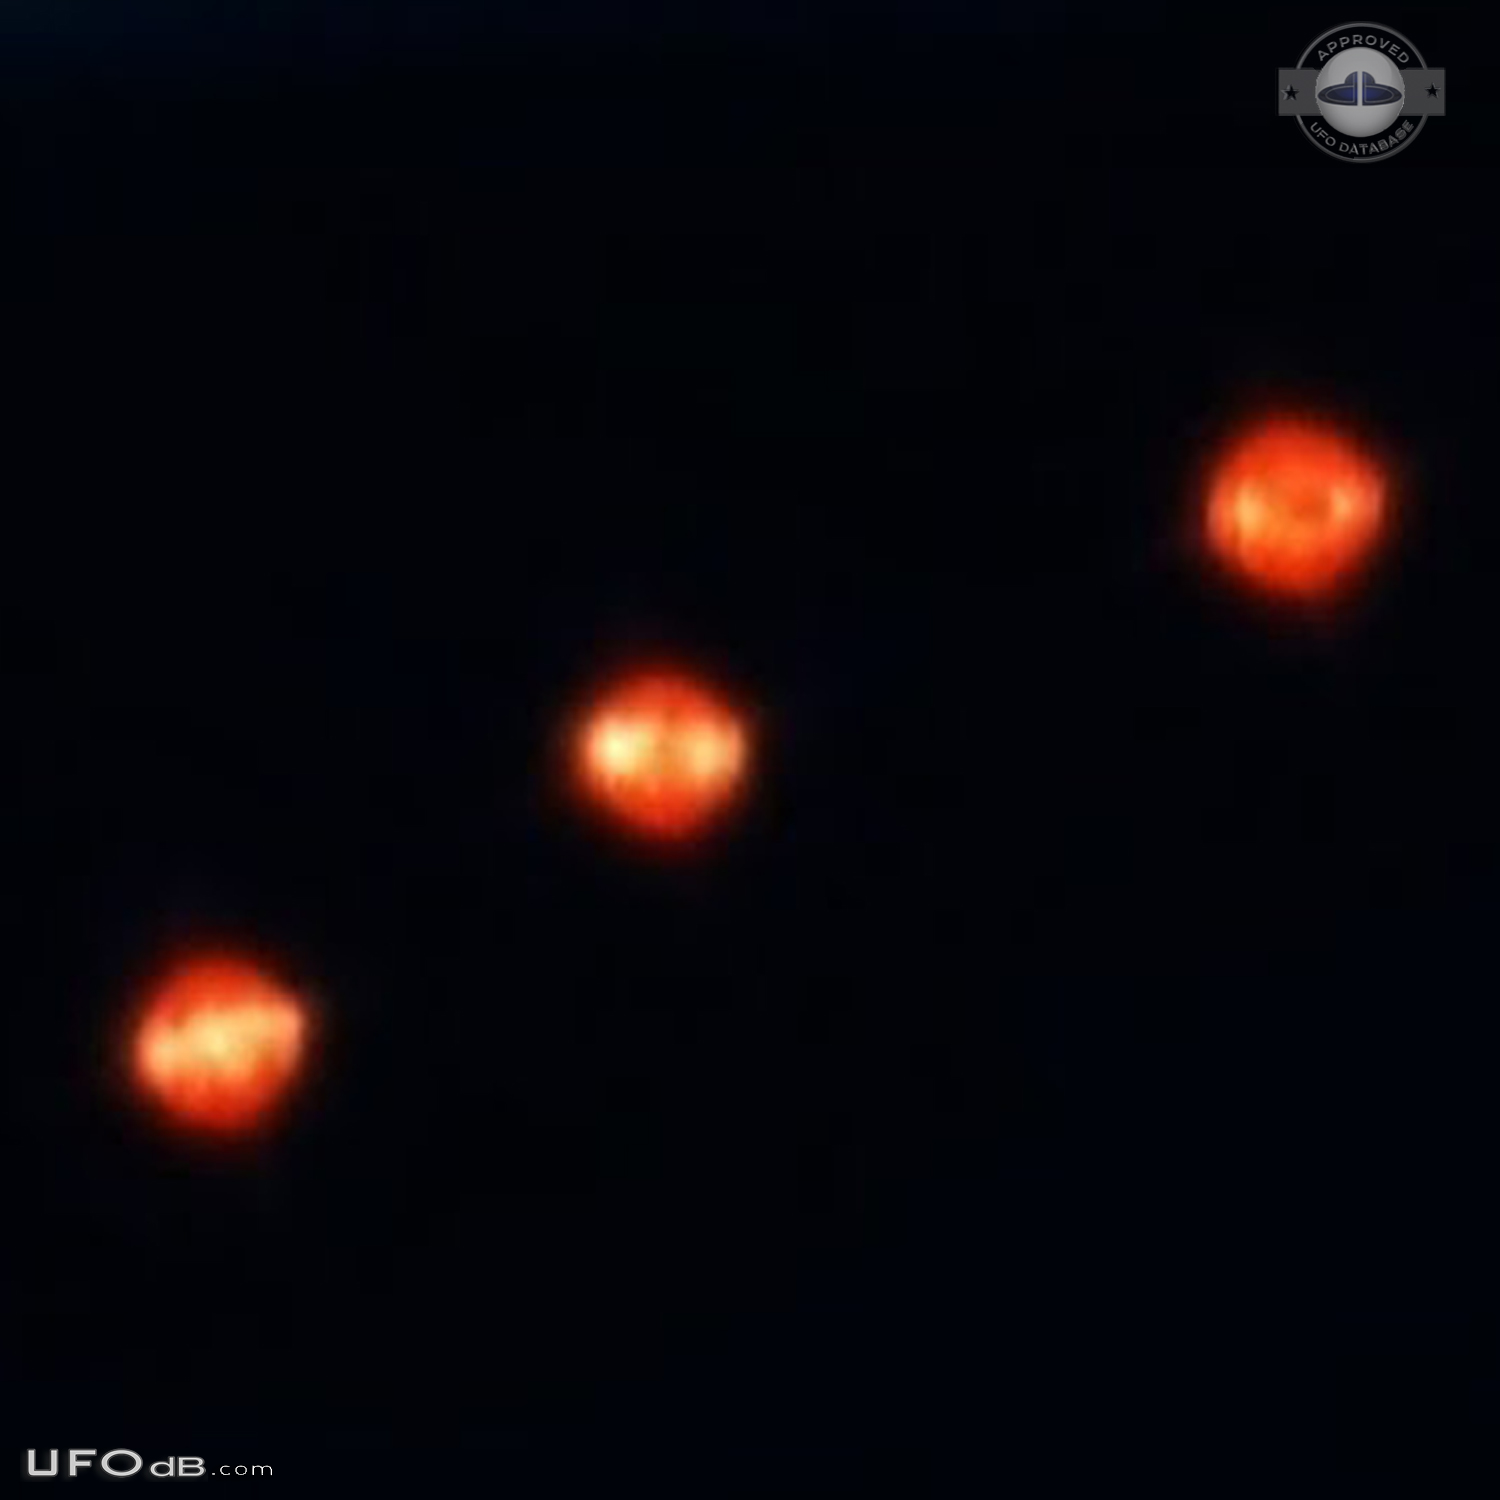 Unusual bright lights UFO not shooting stars or satellites look like t UFO Picture #723-4